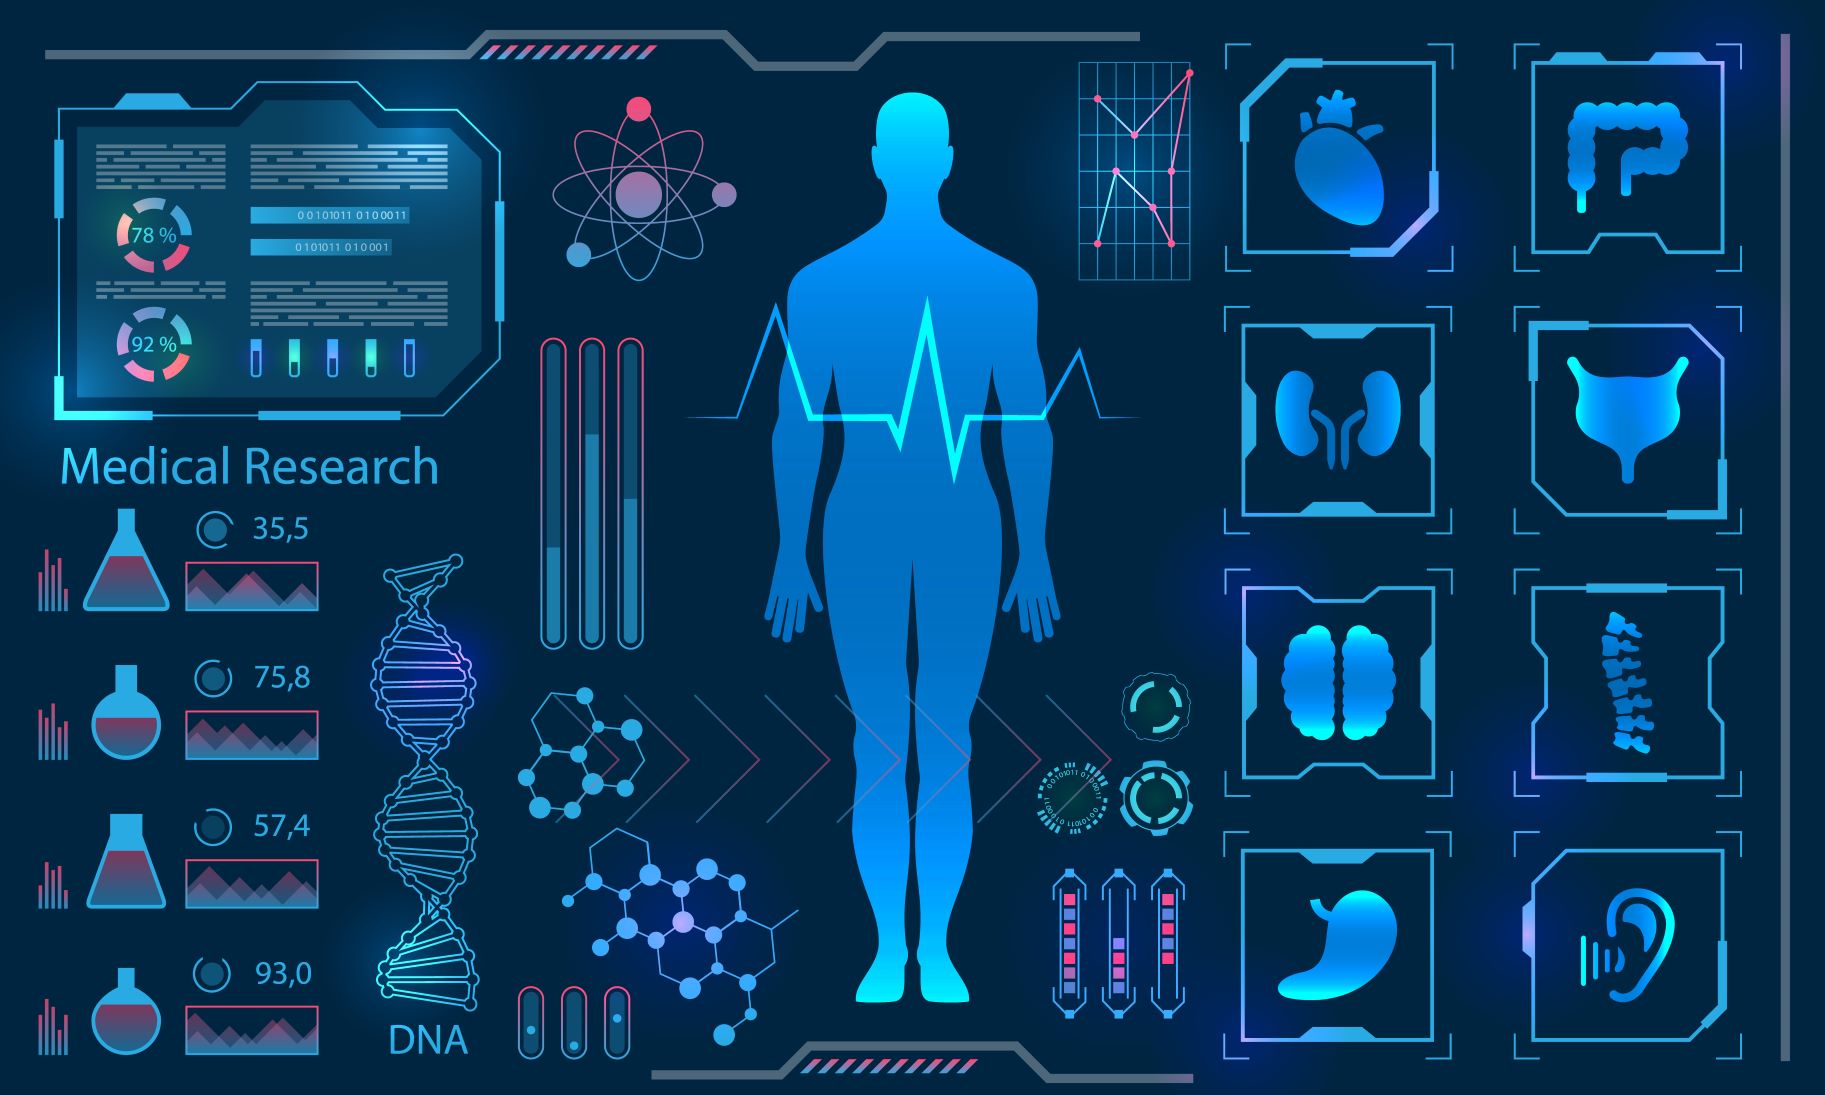 A digital sci-fi themed blue wallpaper of a human's body, organs, DNA, and some chemical glass beakers